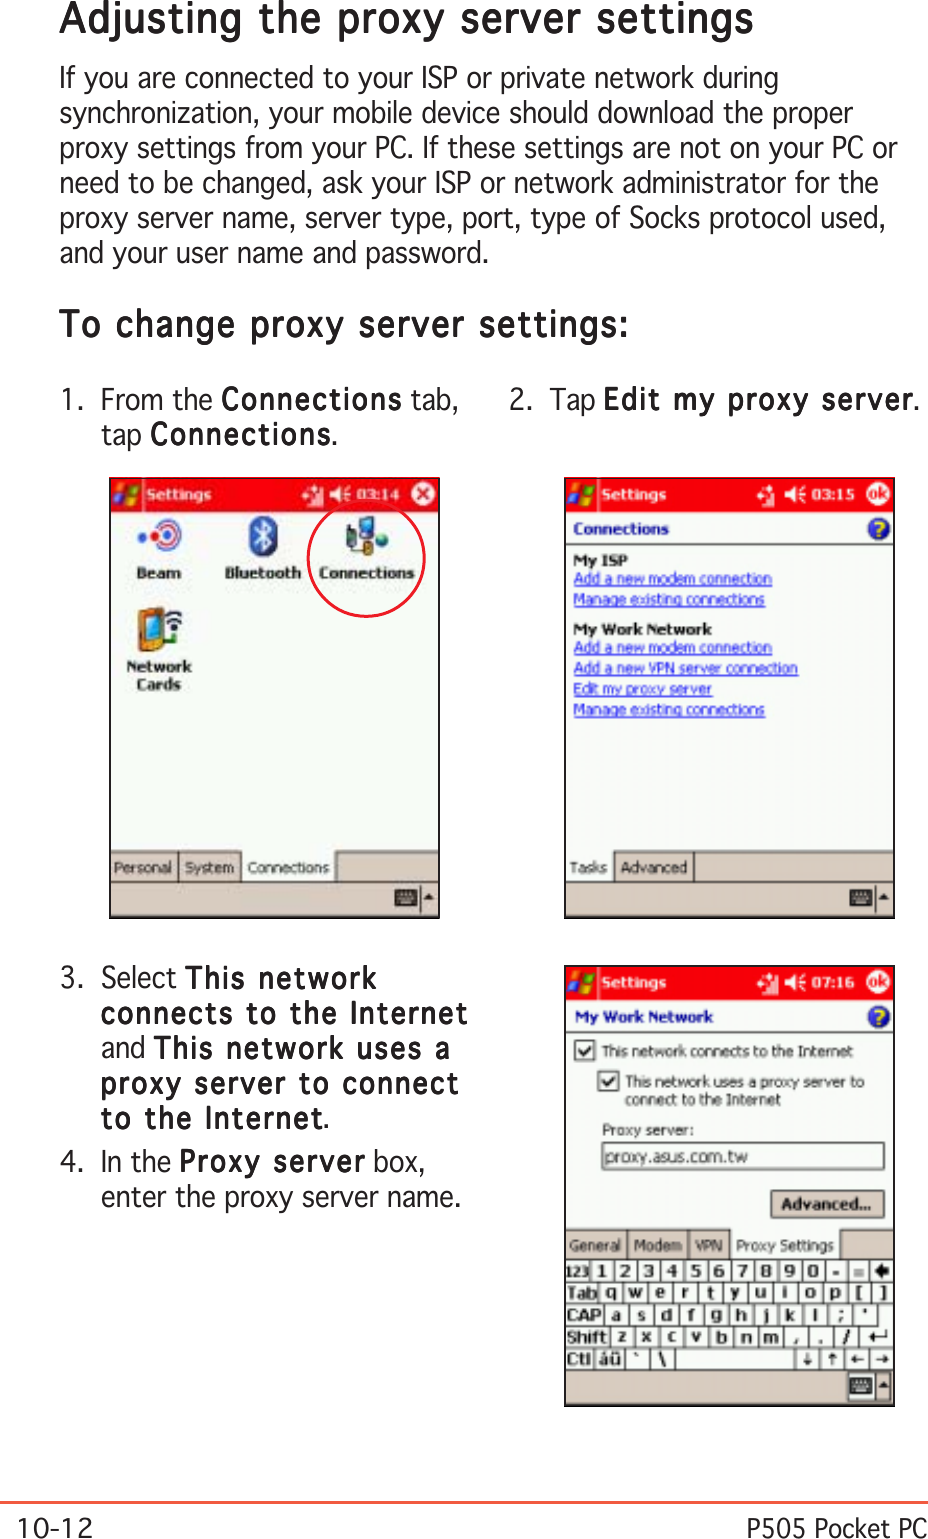 10-12P505 Pocket PCAdjusting the proxy server settingsAdjusting the proxy server settingsAdjusting the proxy server settingsAdjusting the proxy server settingsAdjusting the proxy server settingsIf you are connected to your ISP or private network duringsynchronization, your mobile device should download the properproxy settings from your PC. If these settings are not on your PC orneed to be changed, ask your ISP or network administrator for theproxy server name, server type, port, type of Socks protocol used,and your user name and password.To change proxy server settings:To change proxy server settings:To change proxy server settings:To change proxy server settings:To change proxy server settings:3. Select This networkThis networkThis networkThis networkThis networkconnects to the Internetconnects to the Internetconnects to the Internetconnects to the Internetconnects to the Internetand This network uses aThis network uses aThis network uses aThis network uses aThis network uses aproxy server to connectproxy server to connectproxy server to connectproxy server to connectproxy server to connectto the Internetto the Internetto the Internetto the Internetto the Internet.4. In the Proxy serverProxy serverProxy serverProxy serverProxy server box,enter the proxy server name.2. Tap Edit my proxy serverEdit my proxy serverEdit my proxy serverEdit my proxy serverEdit my proxy server.1. From the ConnectionsConnectionsConnectionsConnectionsConnections tab,tap ConnectionsConnectionsConnectionsConnectionsConnections.